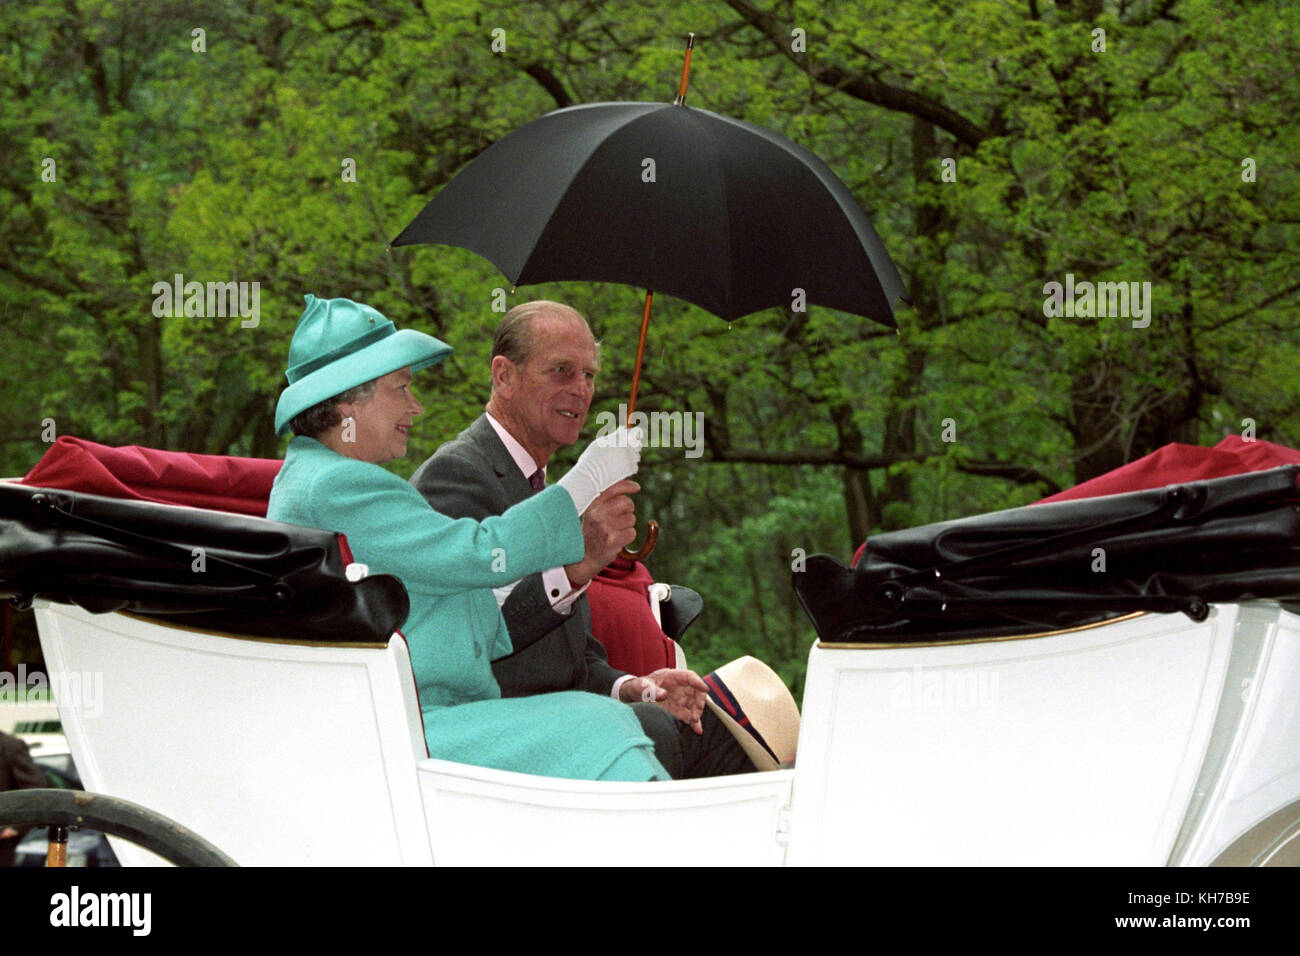 06/05/1993. Queen Elizabeth II and the Duke of Edinburgh share an umbrella whilst enjoying a horse-drawn carriage ride at Bugacs, on the Hungarian Plain during a State Visit to Hungary. The Royal couple will celebrate their platinum wedding anniversary on November 20. Stock Photo